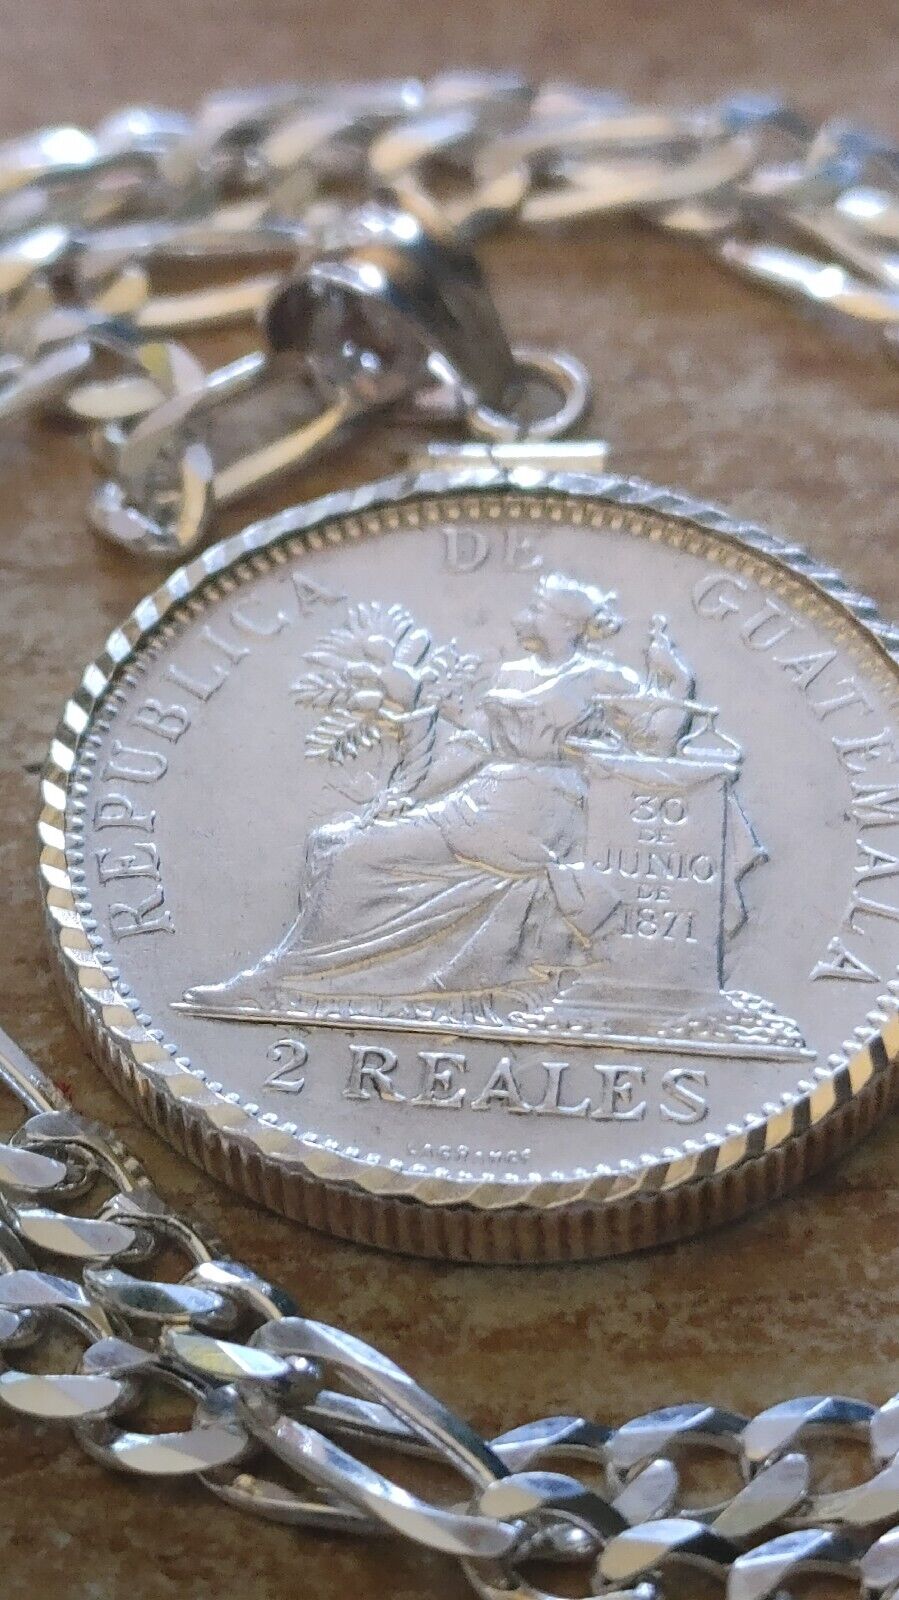 1894 Guatemala Muskets Scales of Justice 2 REALES Pendant  18" 925 SILVER CHAIN Everymagicalday